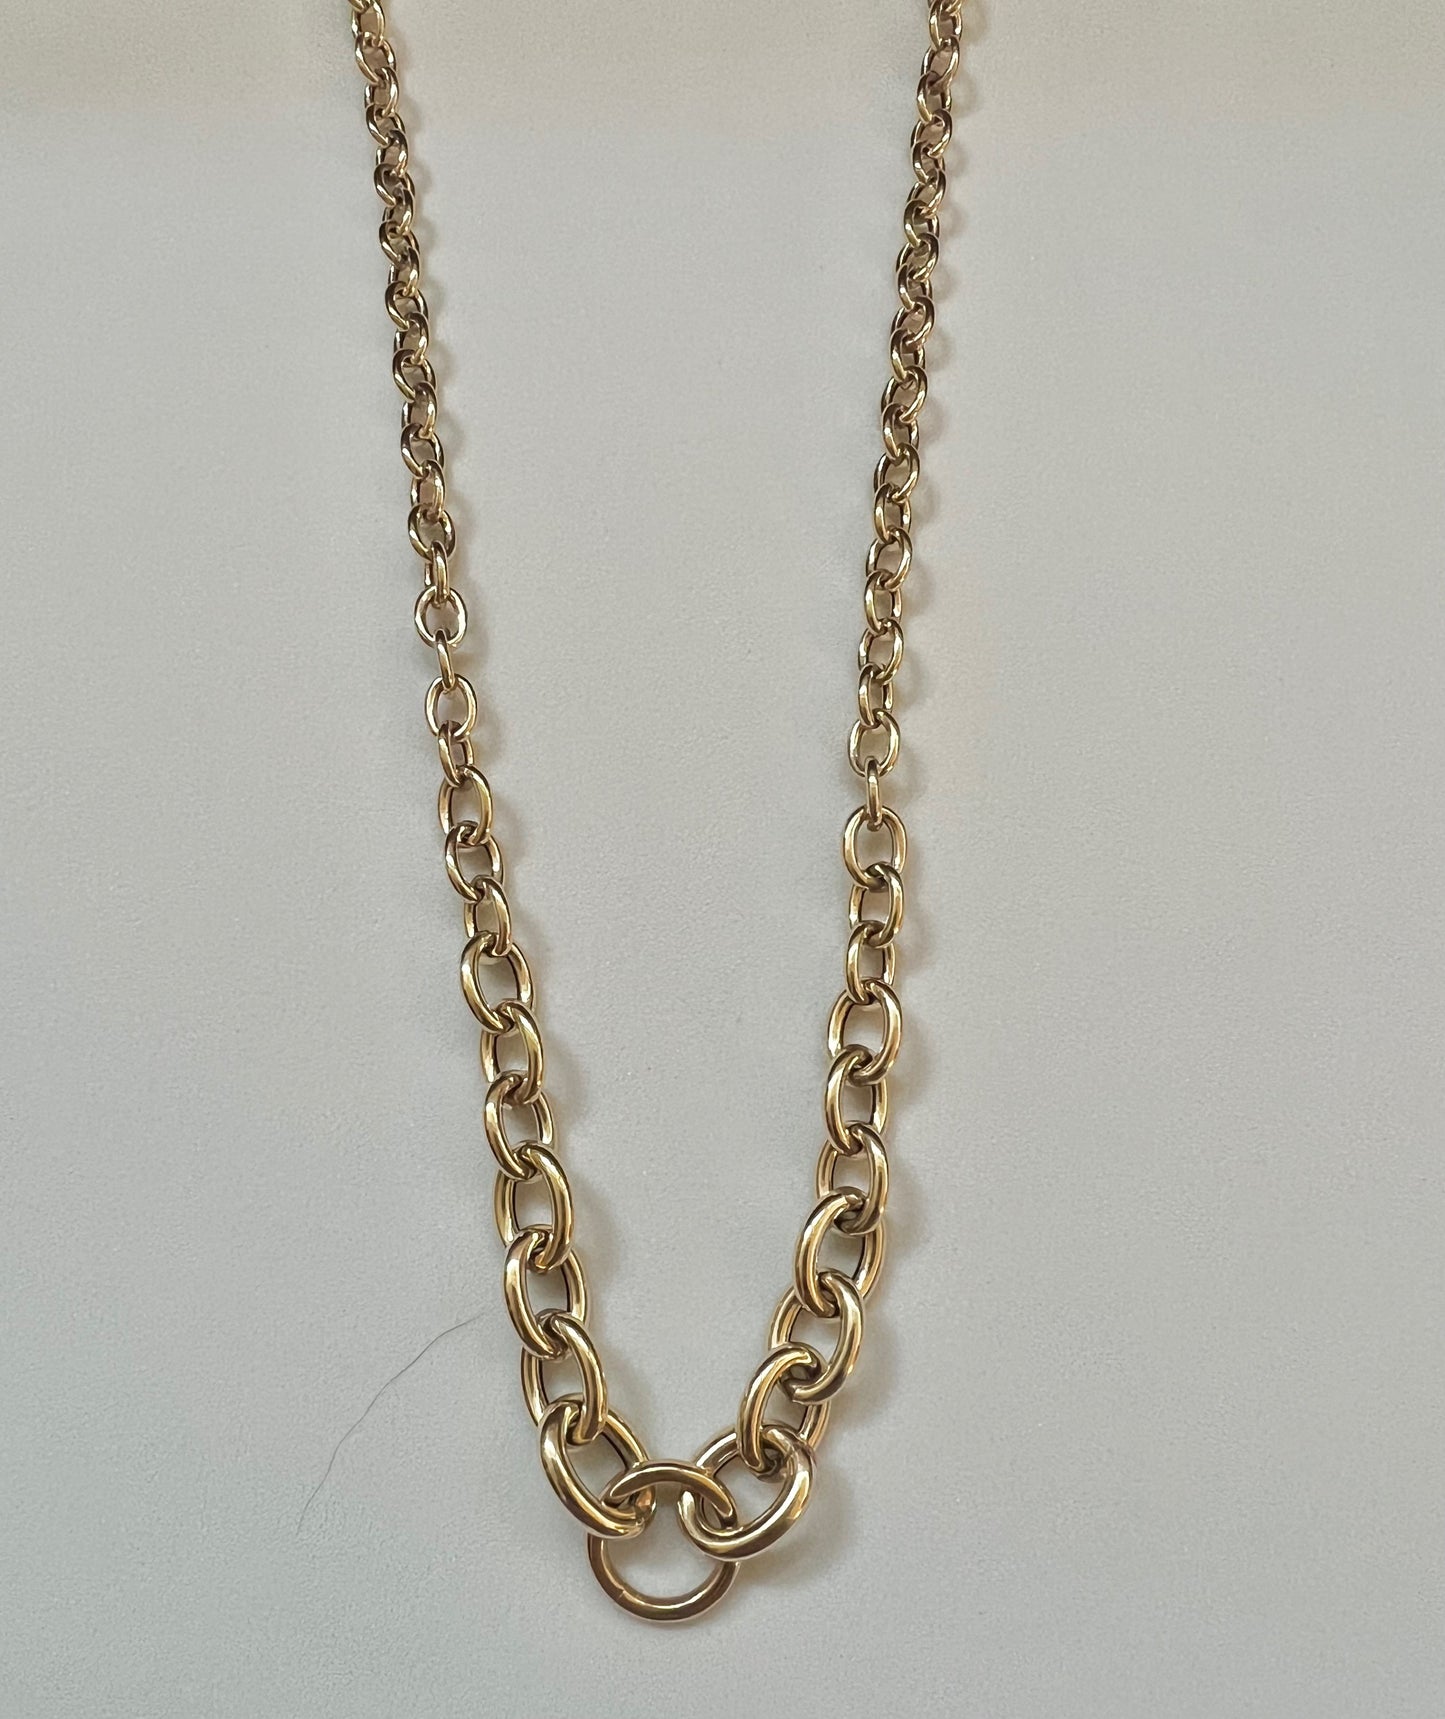 14K gold graduated link chain with openable bail